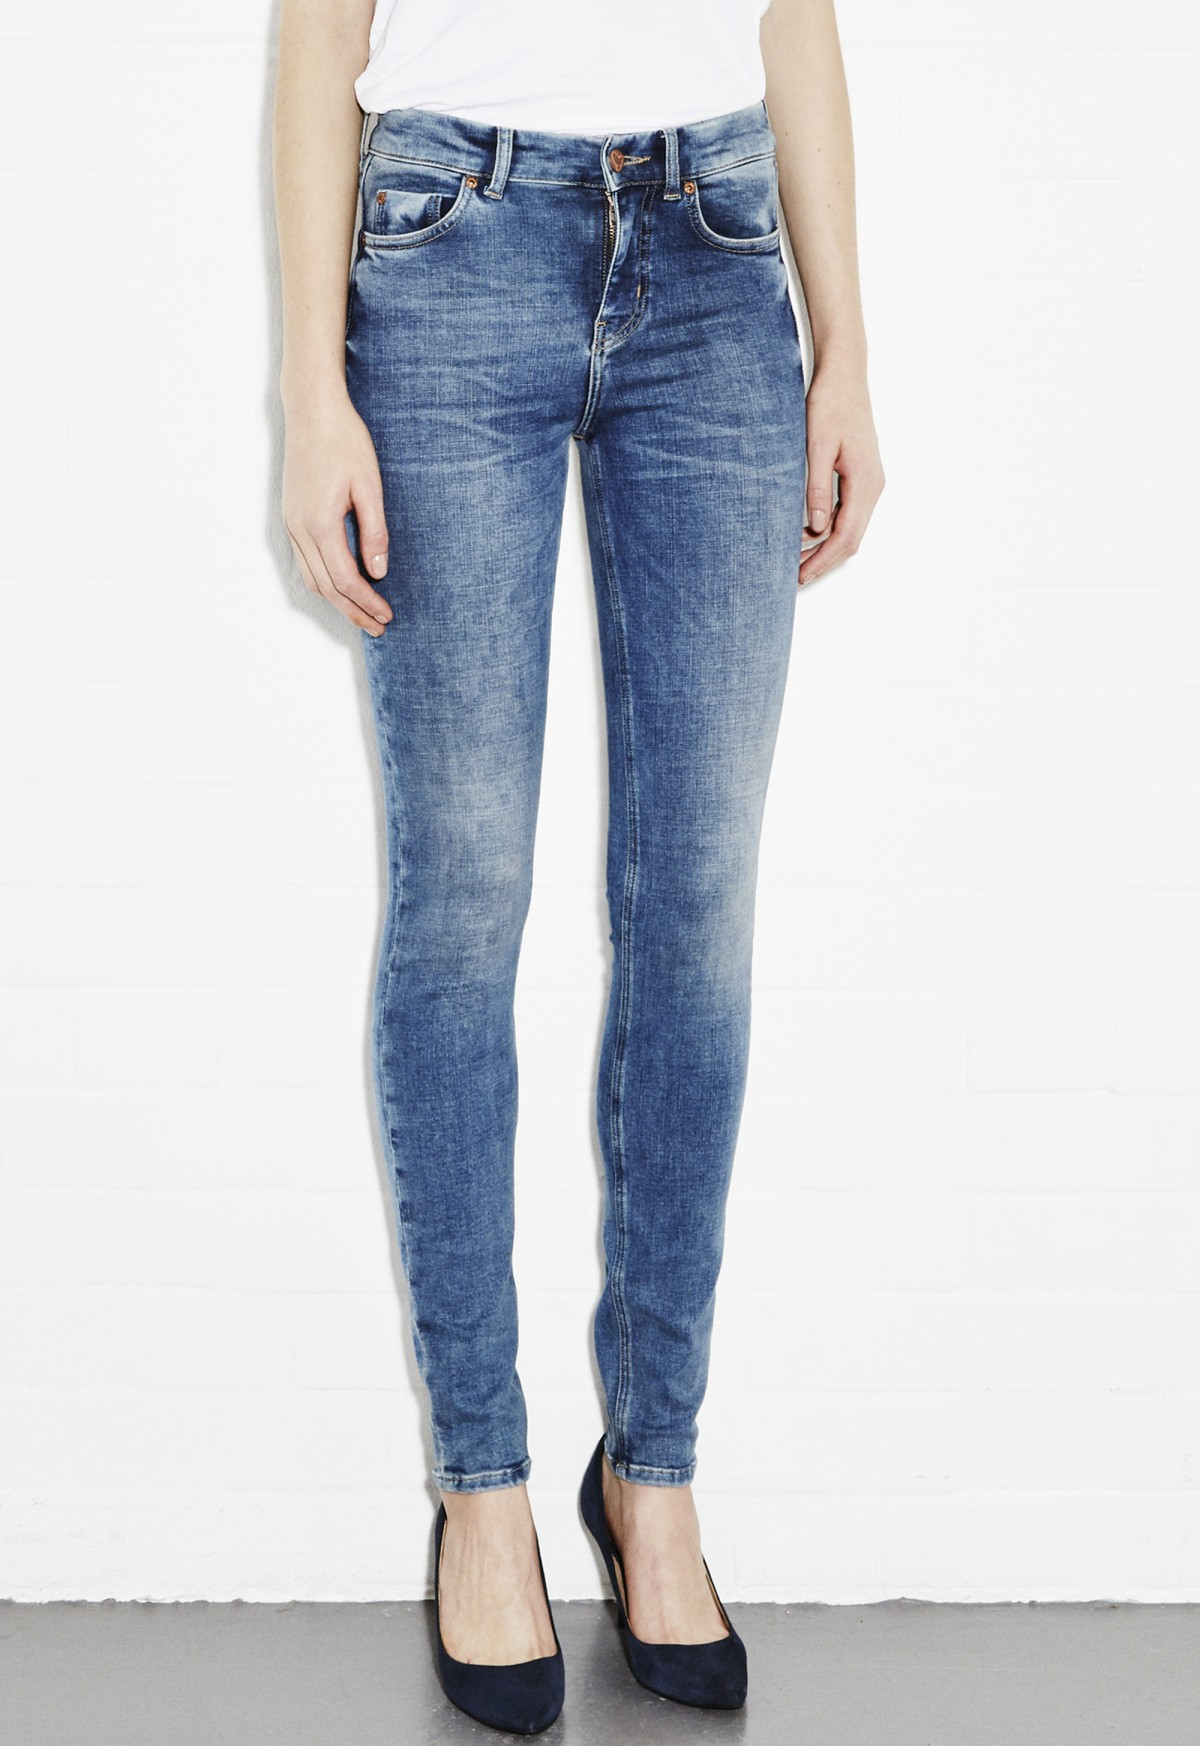 Mih Jeans Bodycon 5 Pocket Jean in Blue (Mesa) | Lyst